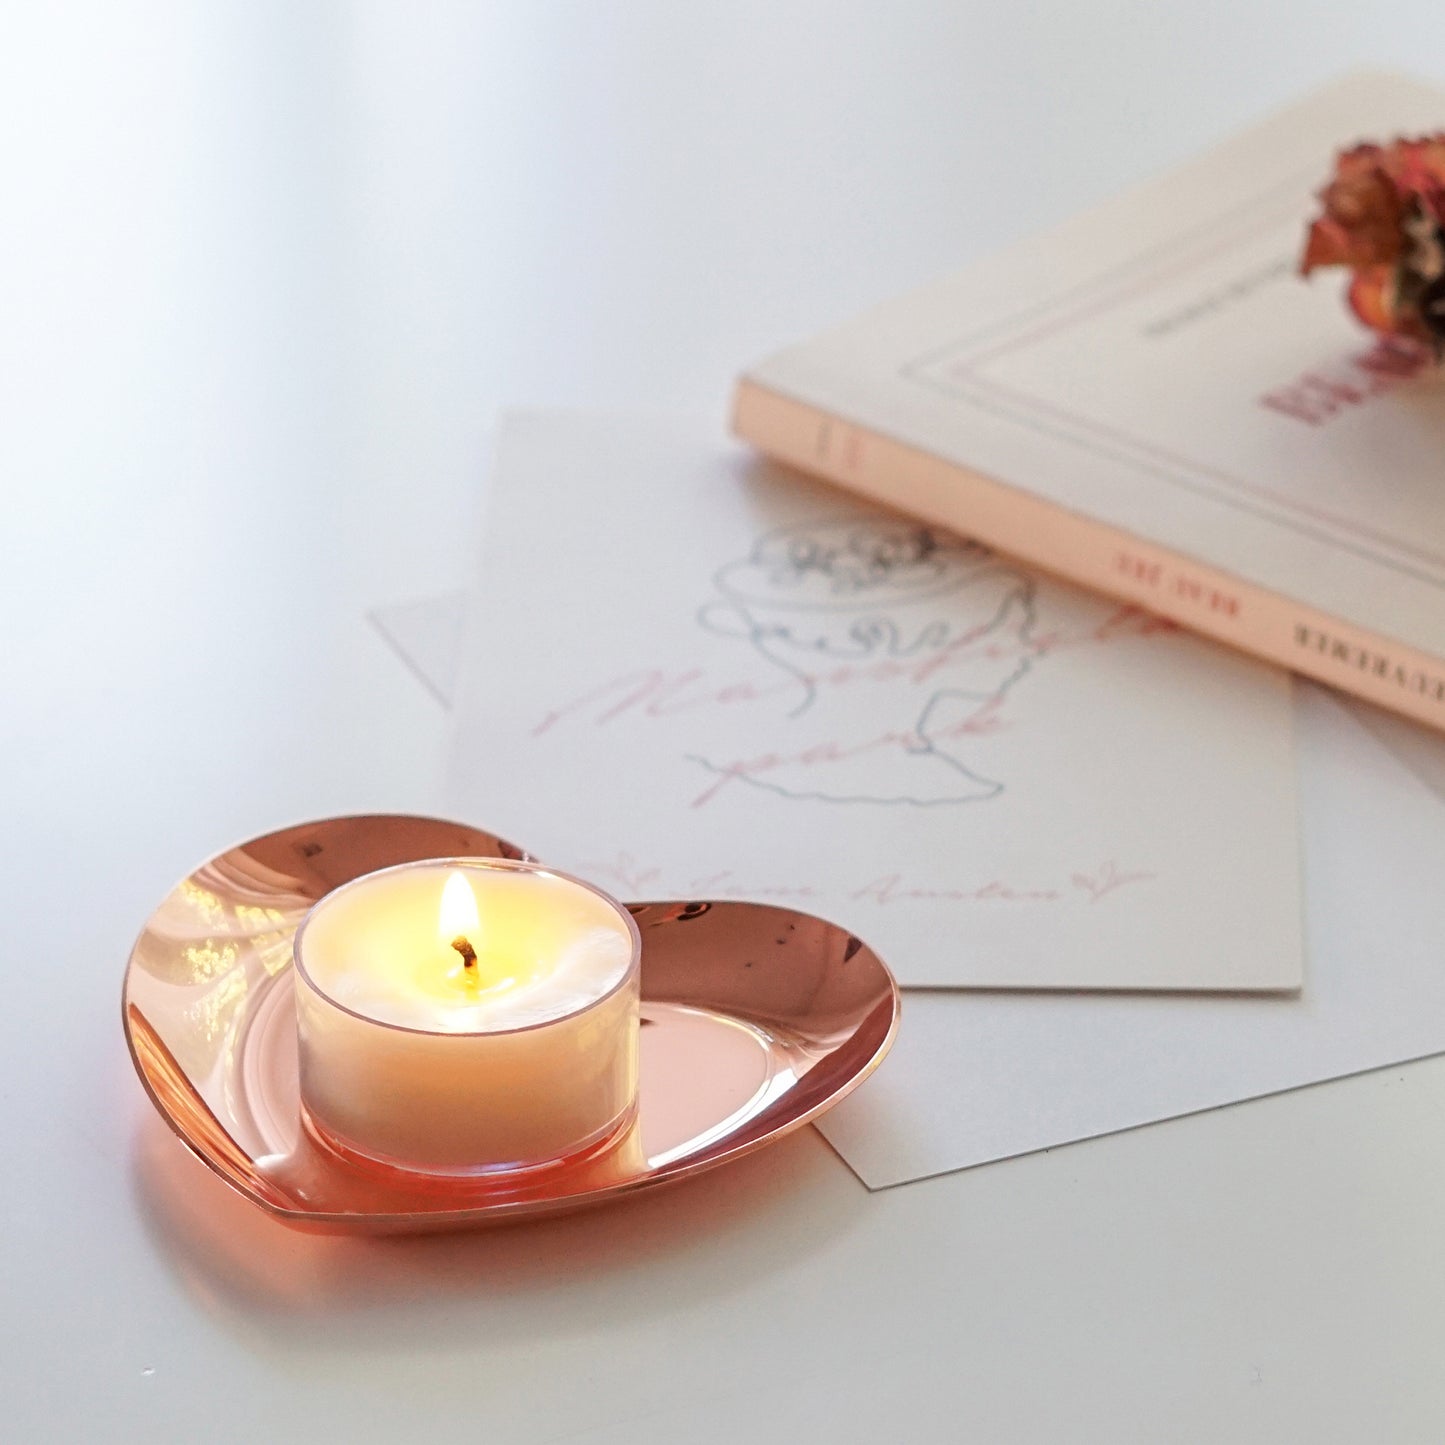 a lit tealight candle on rose gold heart tray, postcards, french book, and pink dried roses